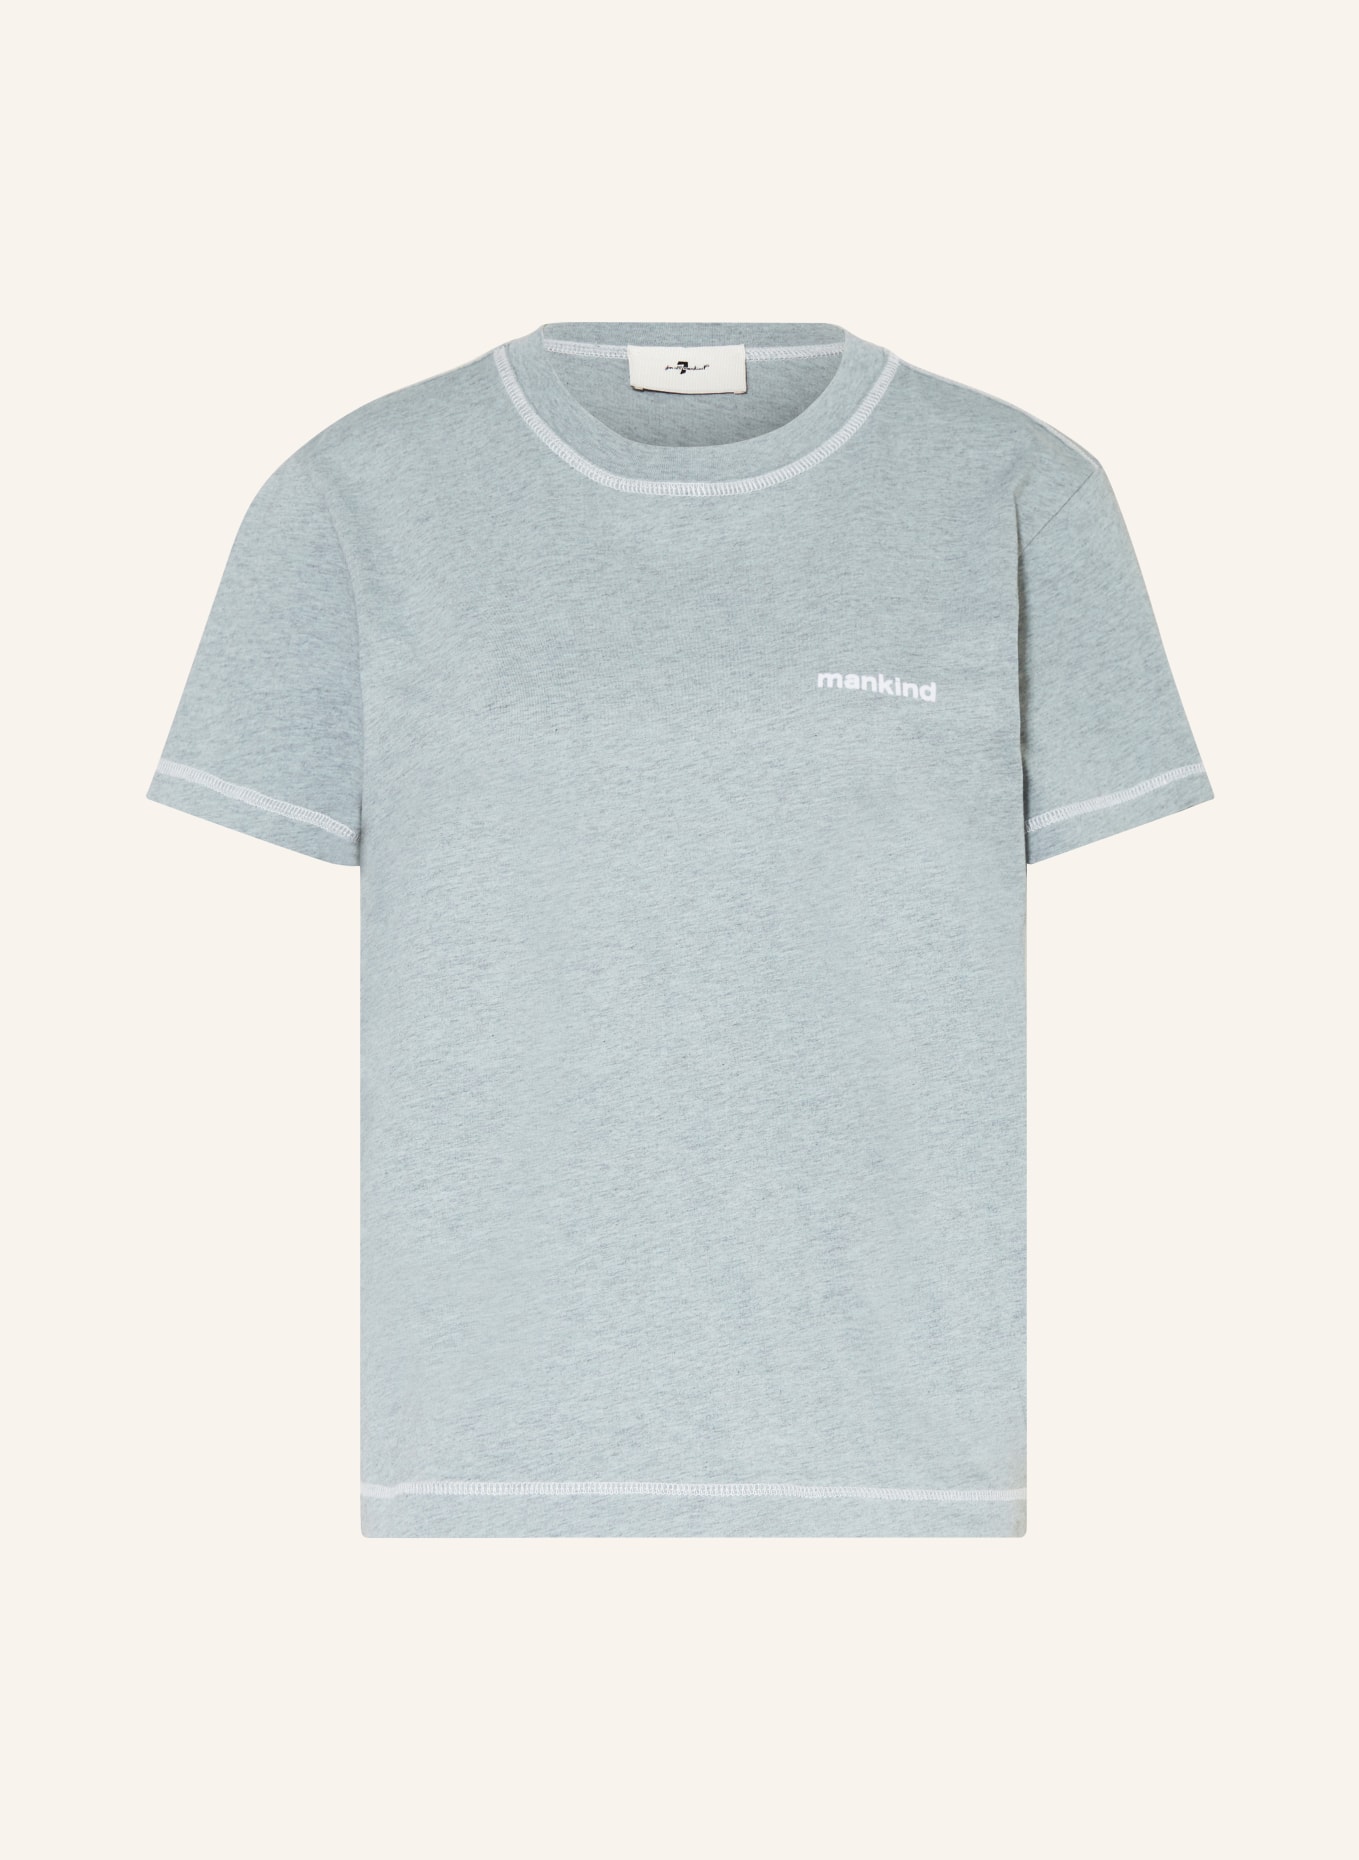 7 for all mankind T-shirt, Color: GRAY (Image 1)